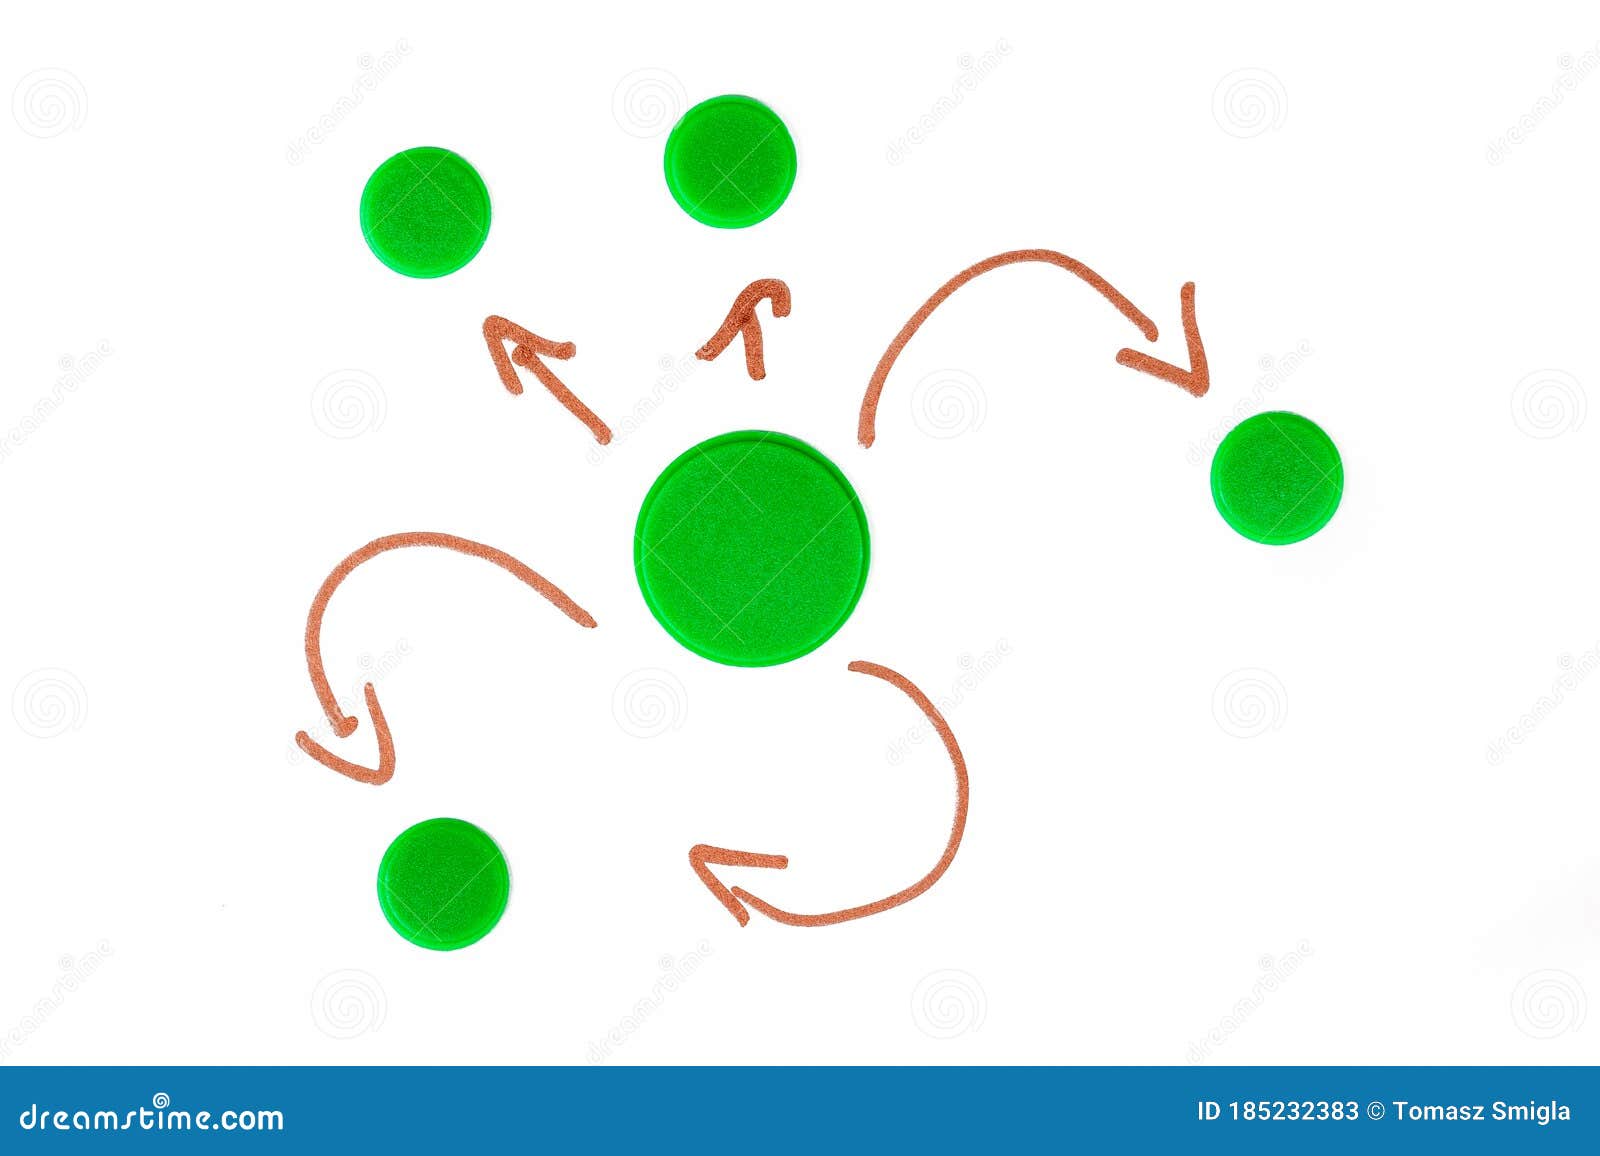 simple centralized networking , arrows. network with central point, green nodes, outbound connections, broadcast